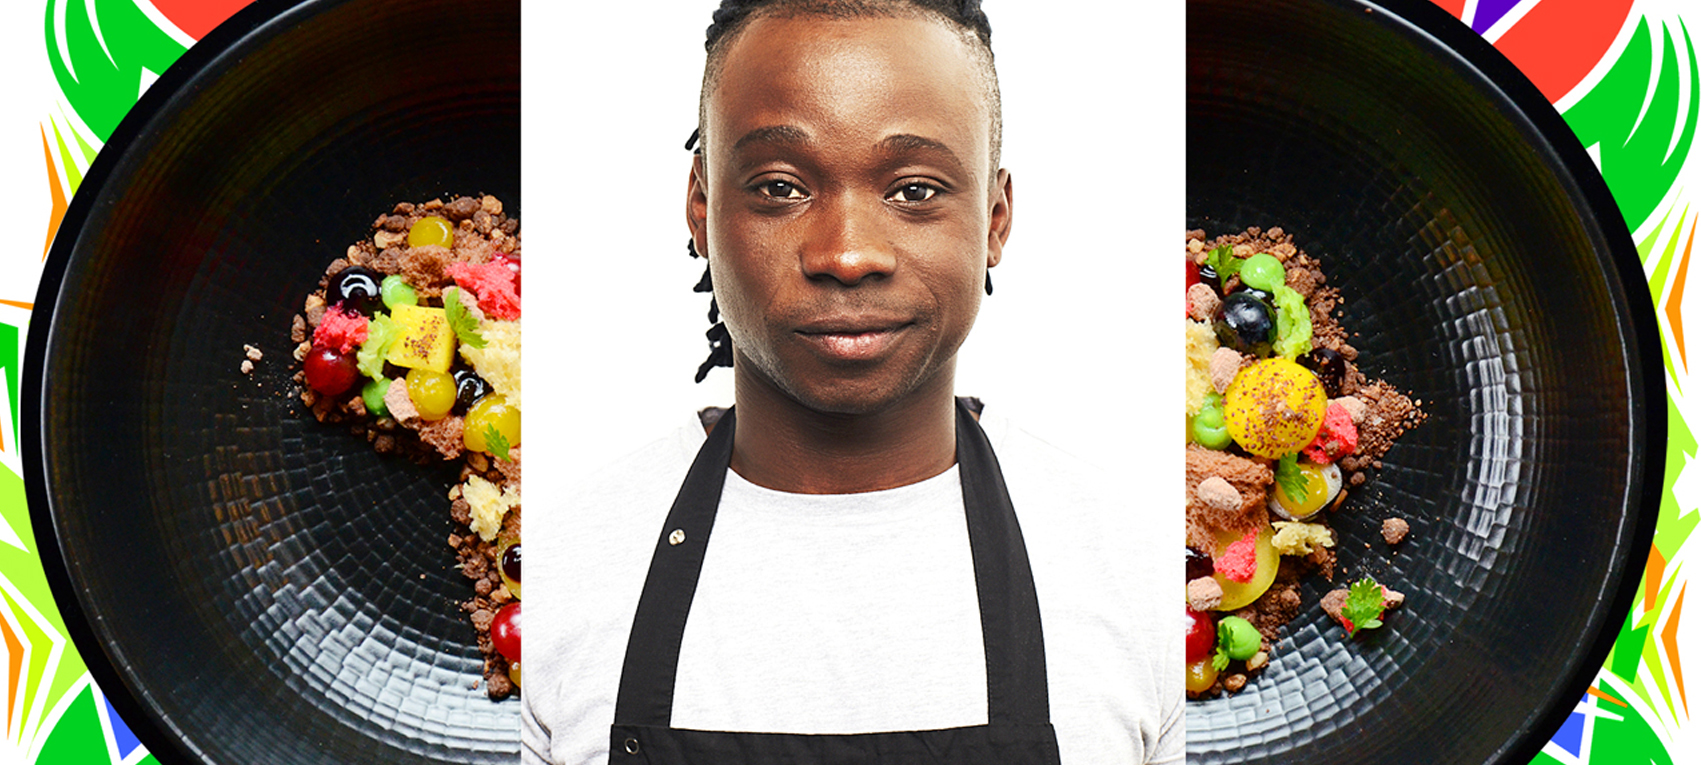 Chef Dieuveil Malonga at Table Ronde - From May 29th, 2015 to June the 6th